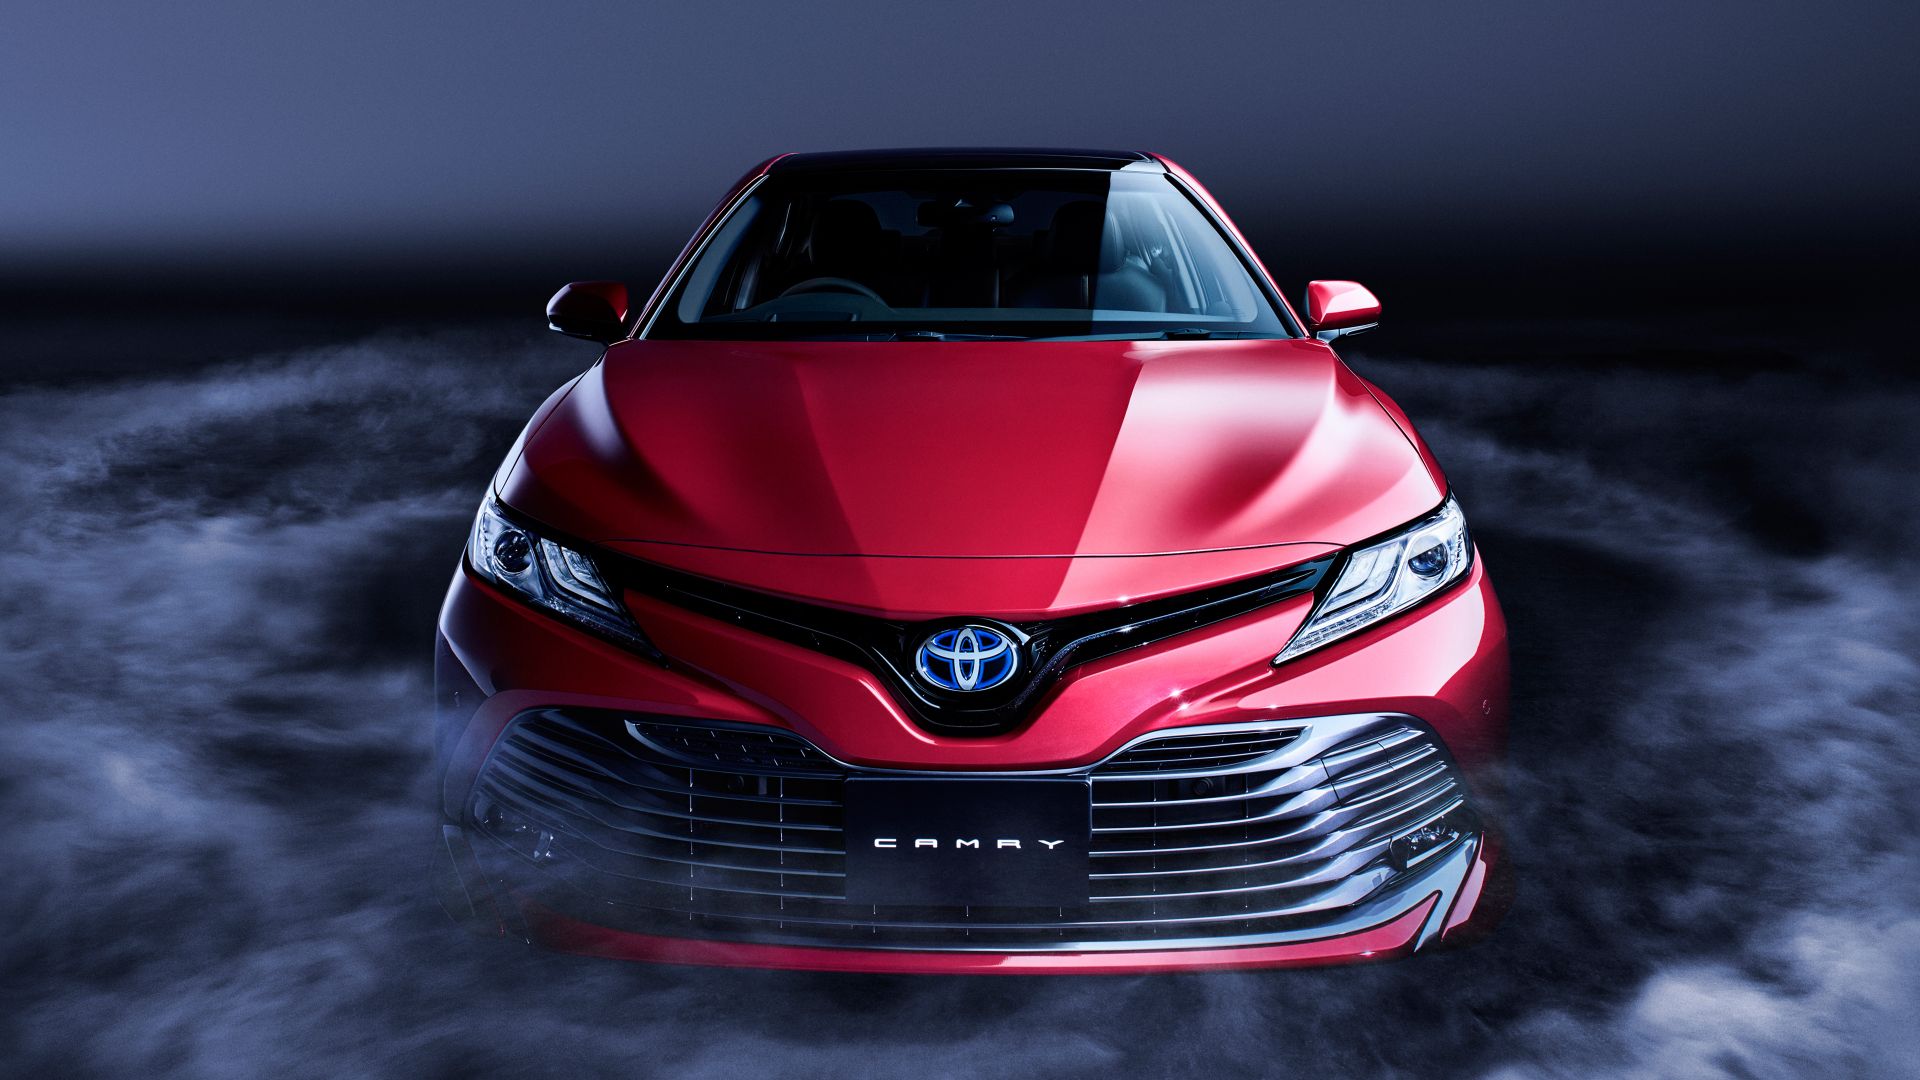 Wallpaper Toyota Camry, red car, front view, 2018, 4k